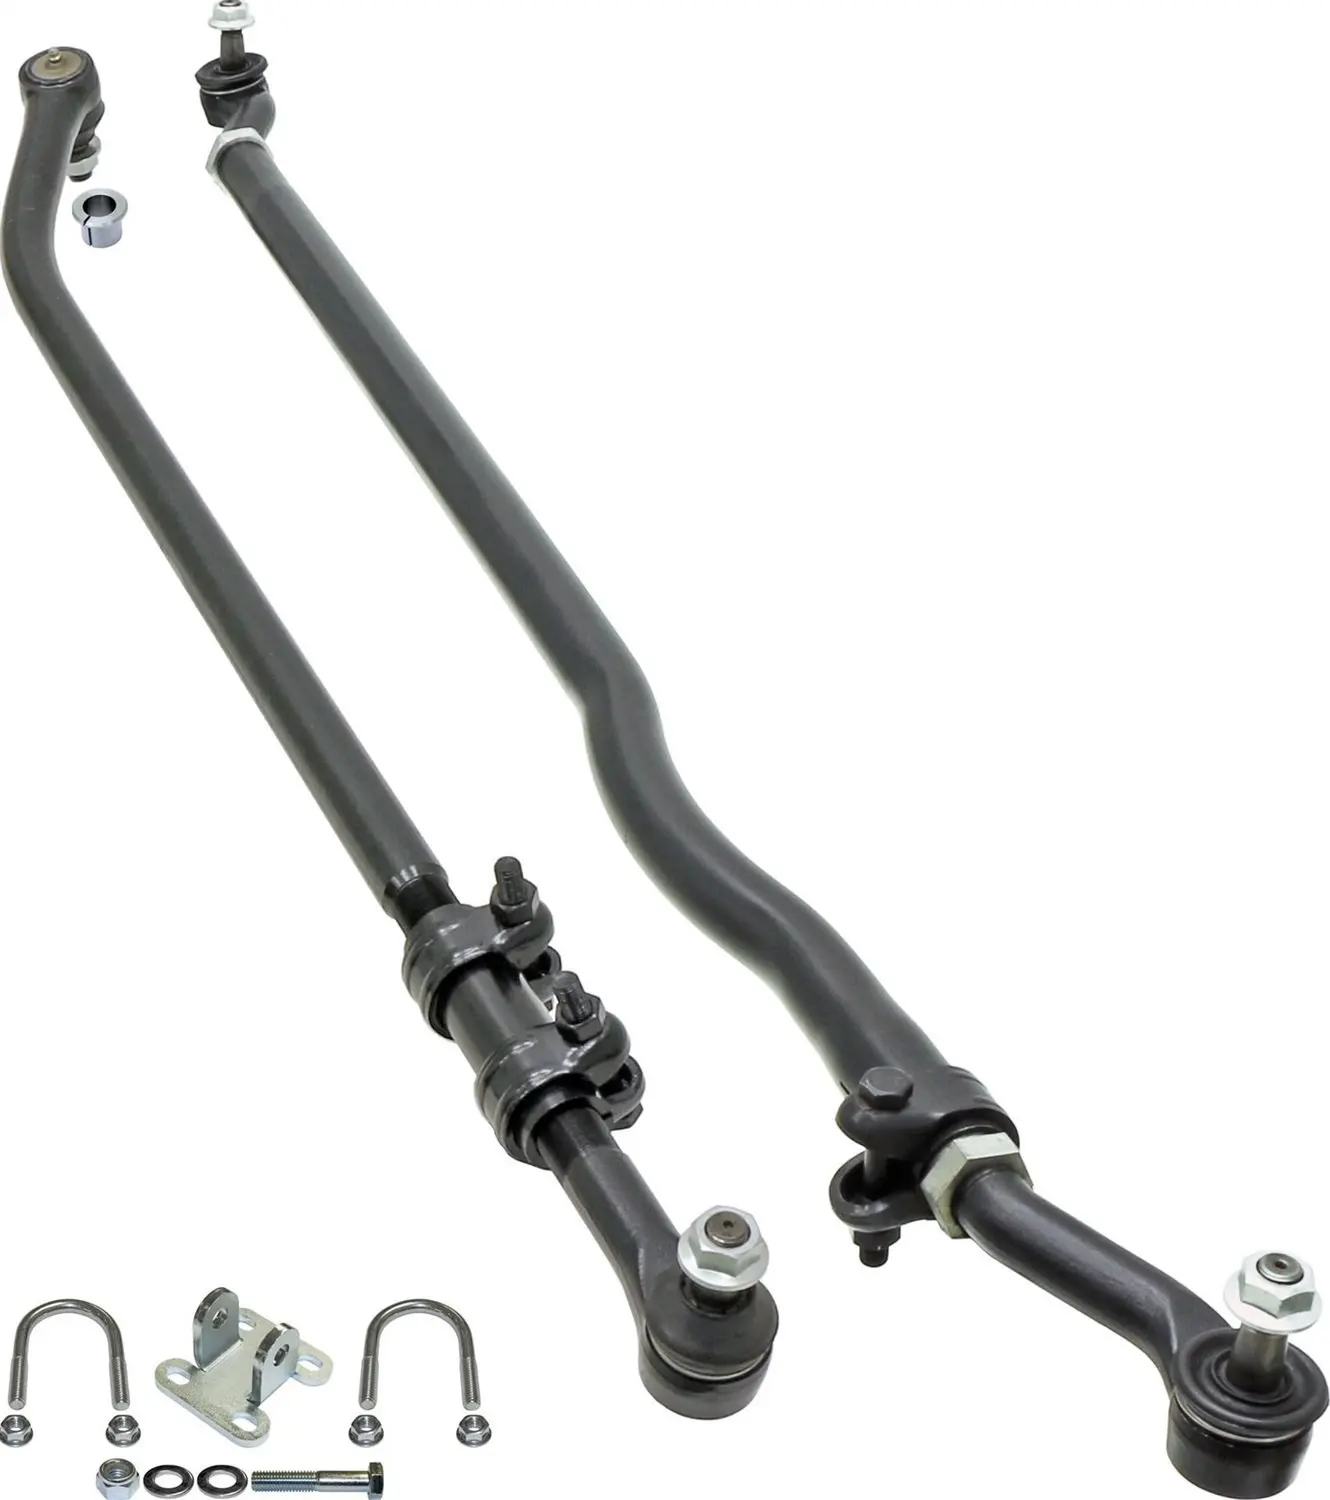 Buy NEW CURRIE CURRECTLYNC STEERING SYSTEM,07-18 JEEP WRANGLER JK,DRAG